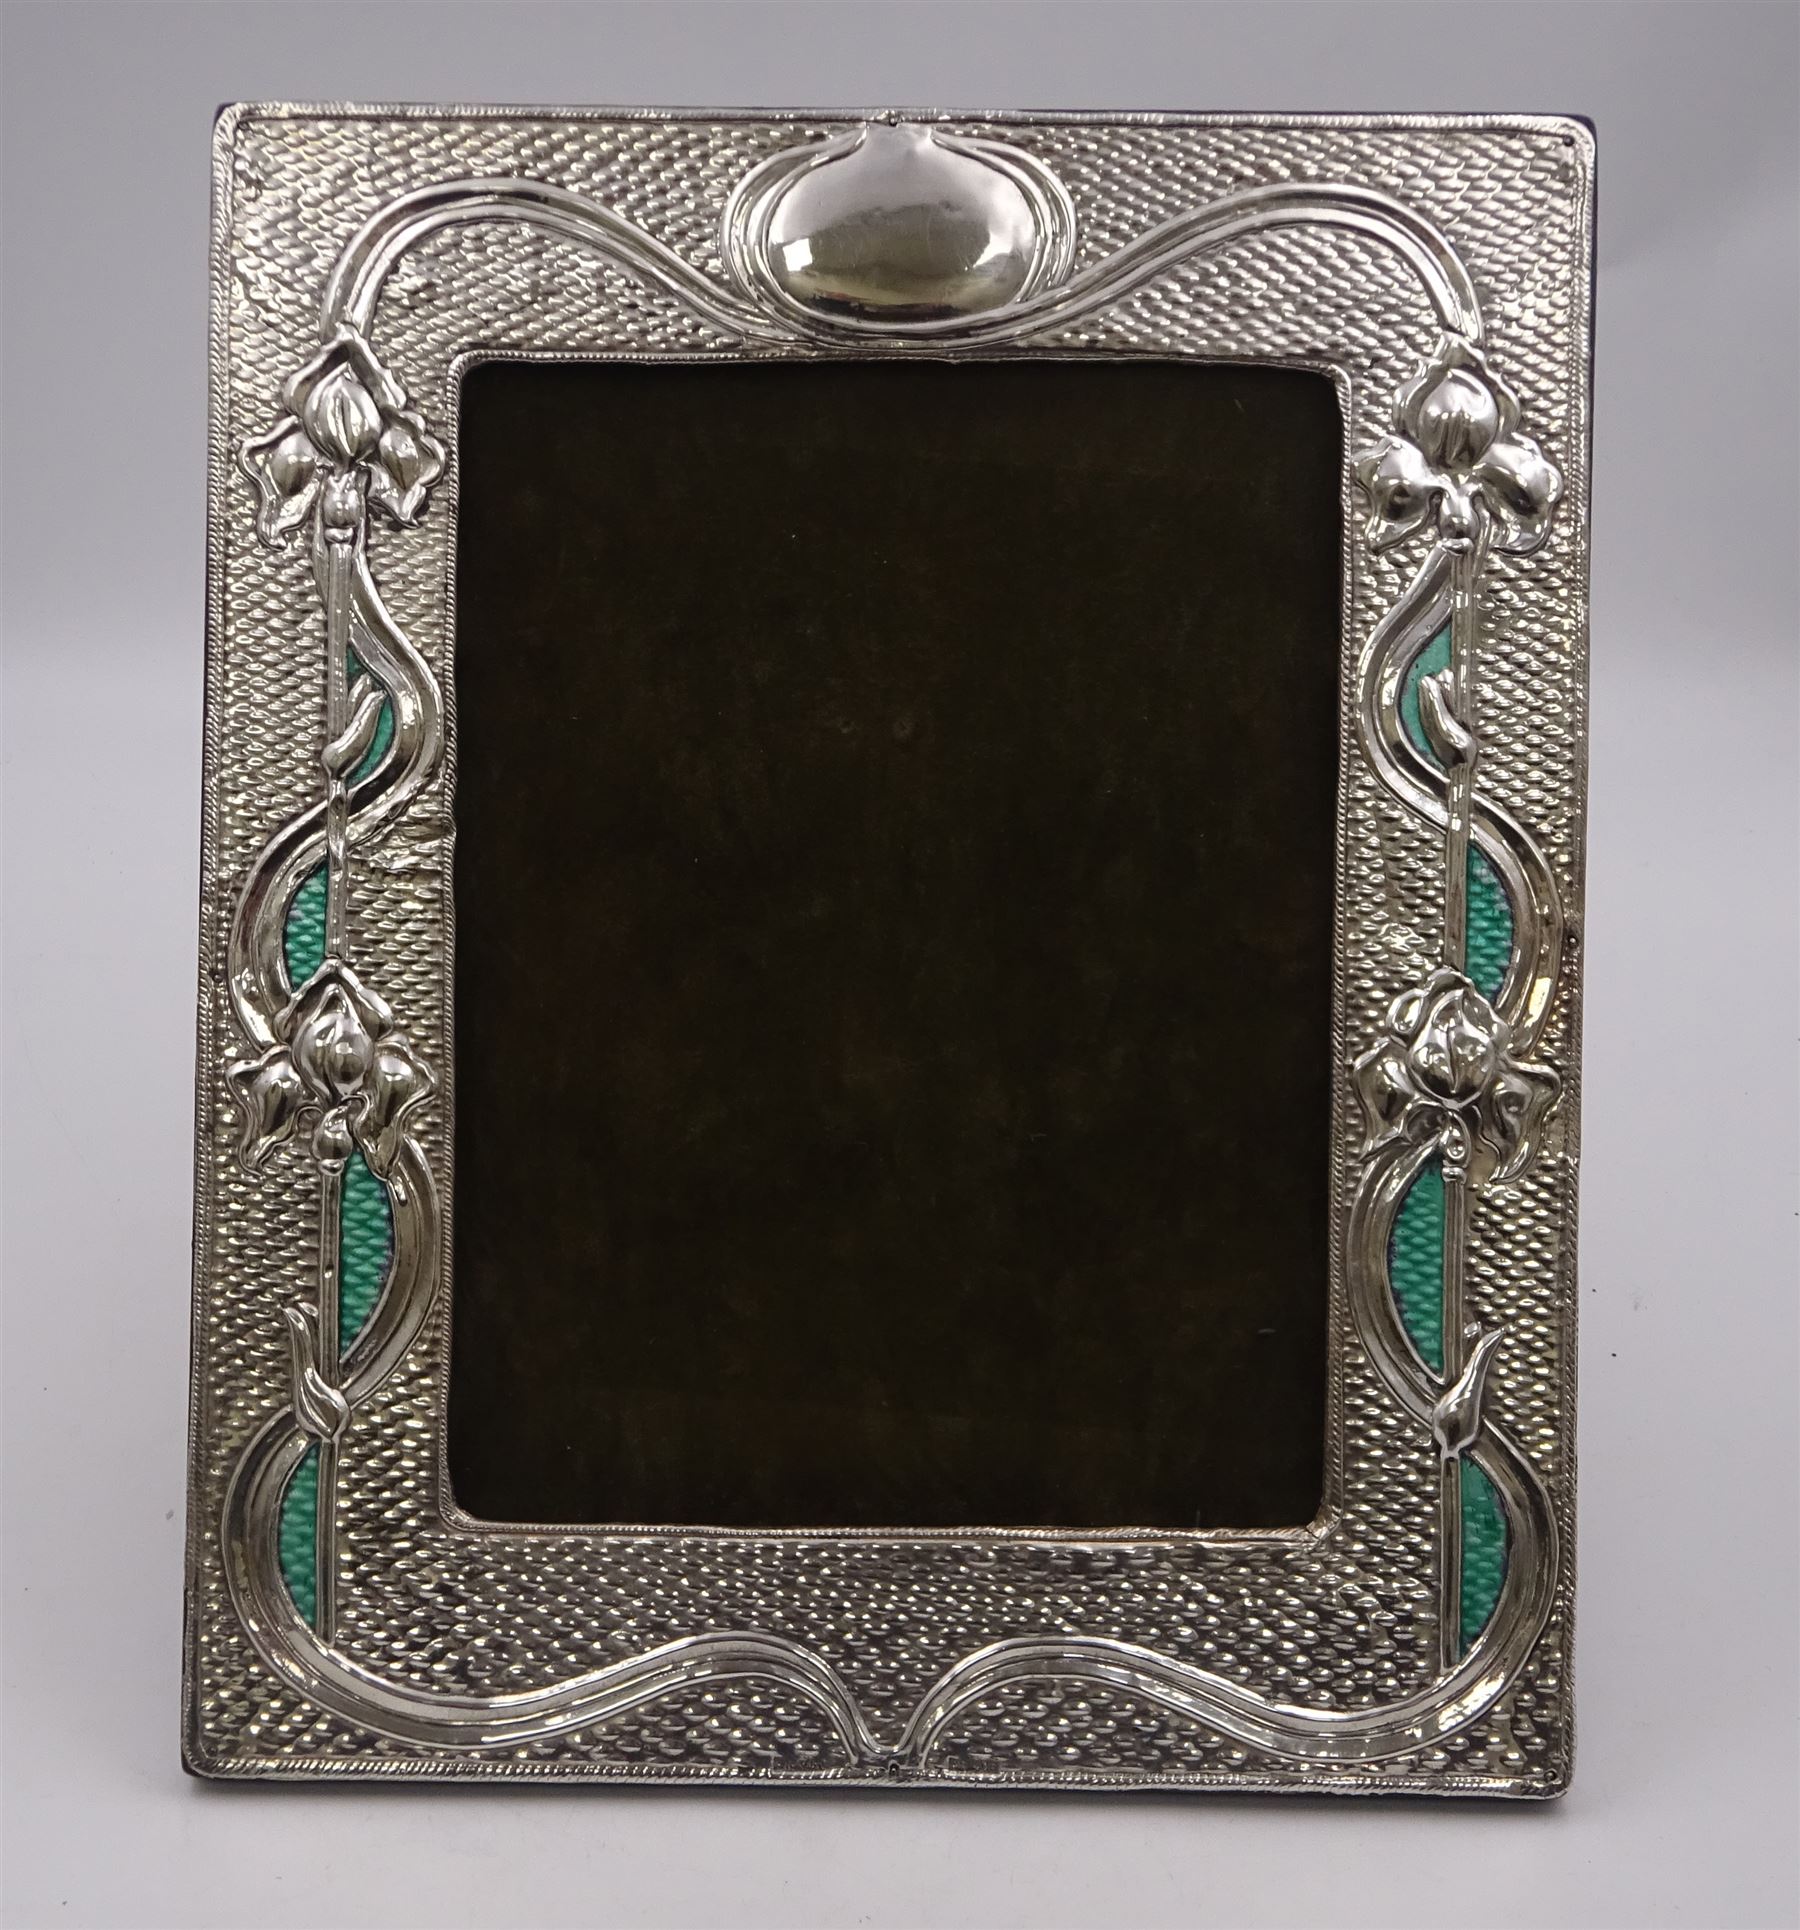 American Art Nouveau silver mounted photograph frame - Image 2 of 6